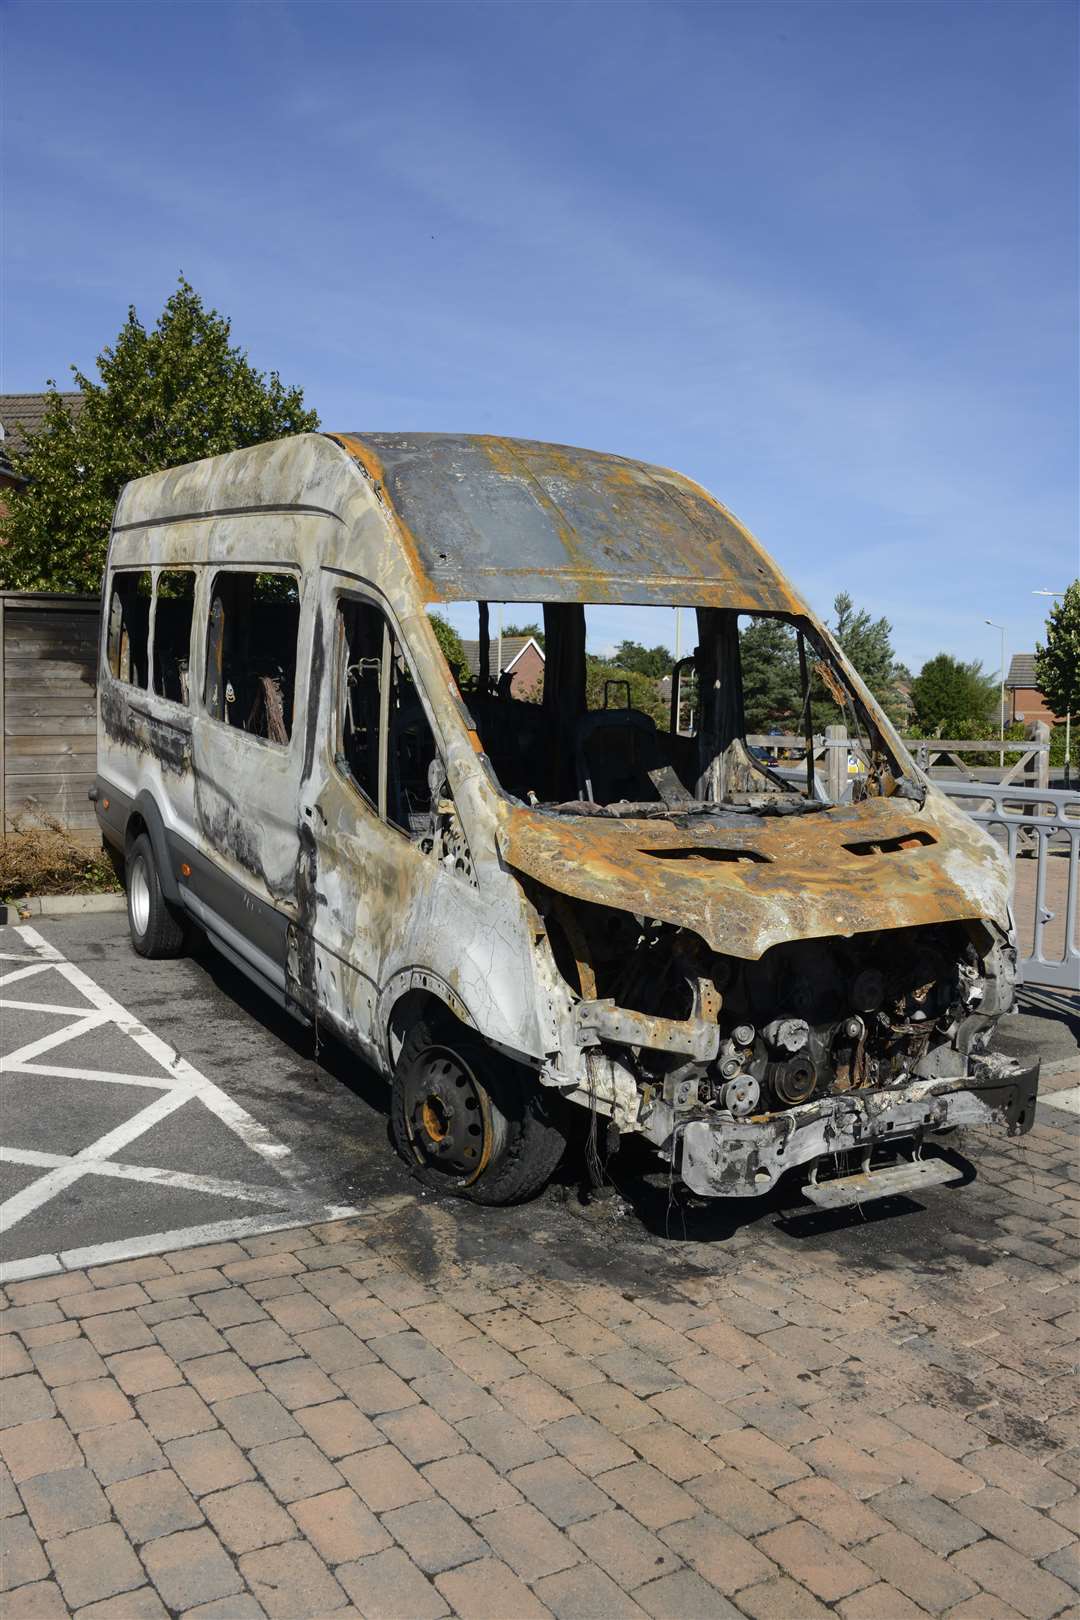 The minibus was destroyed by fire. Picture: Paul Amos